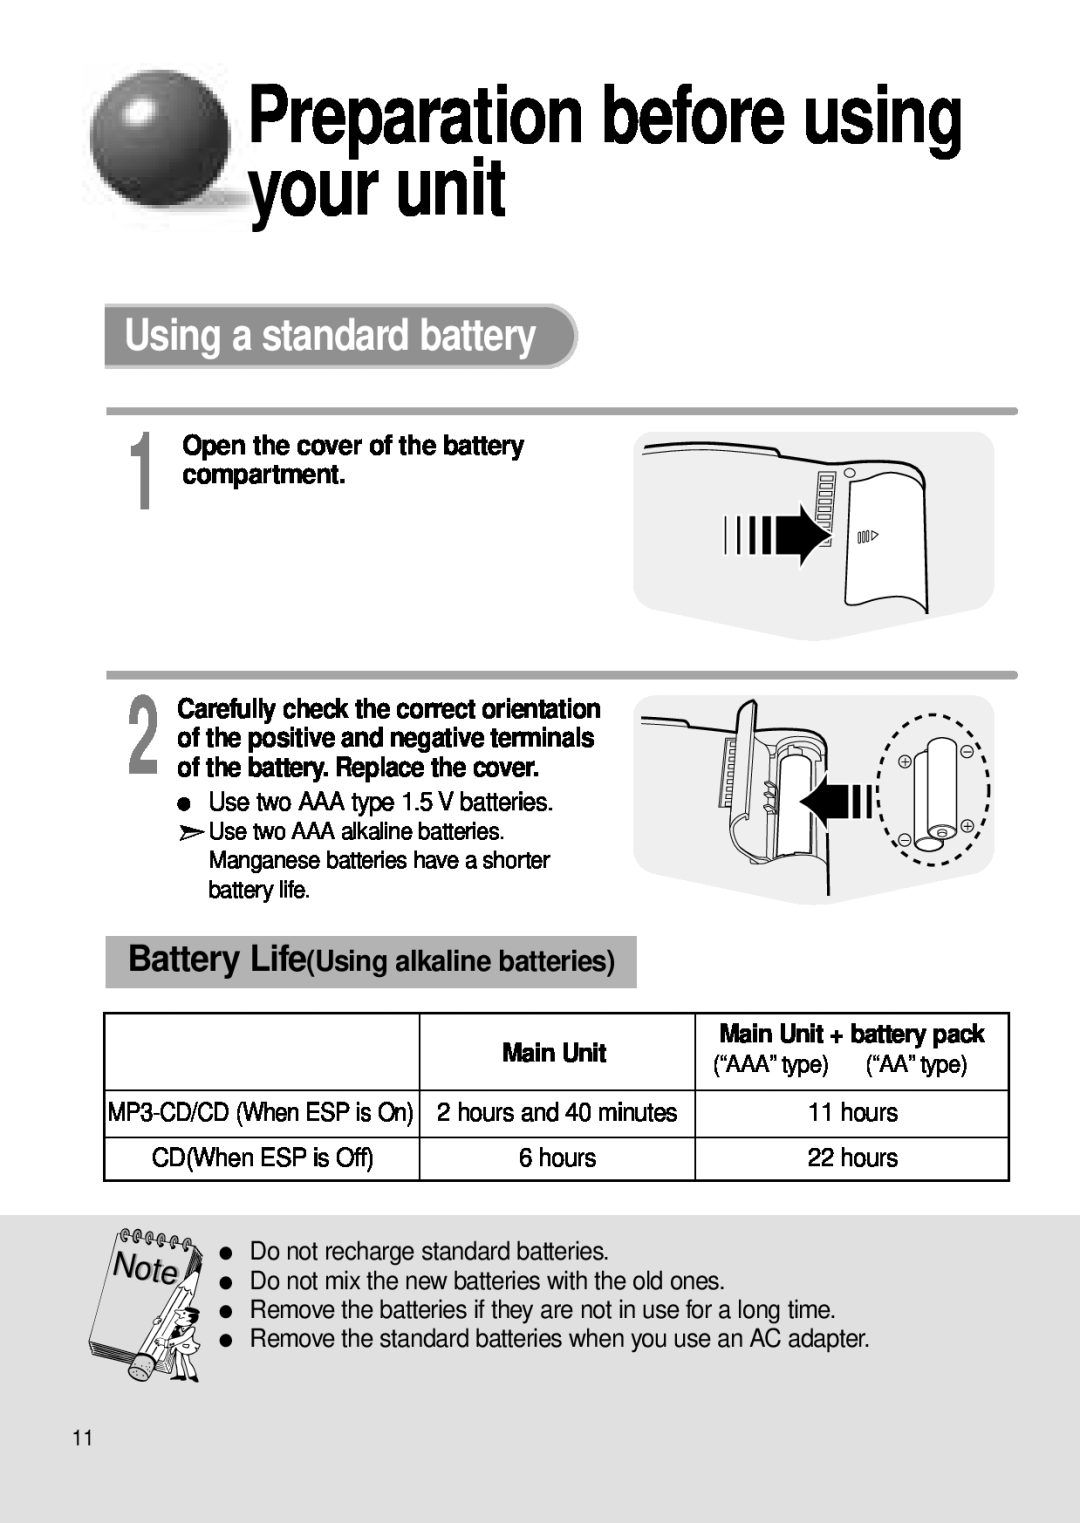 Samsung MCD-MP67 Using a standard battery, Preparation before using your unit, Battery LifeUsing alkaline batteries 